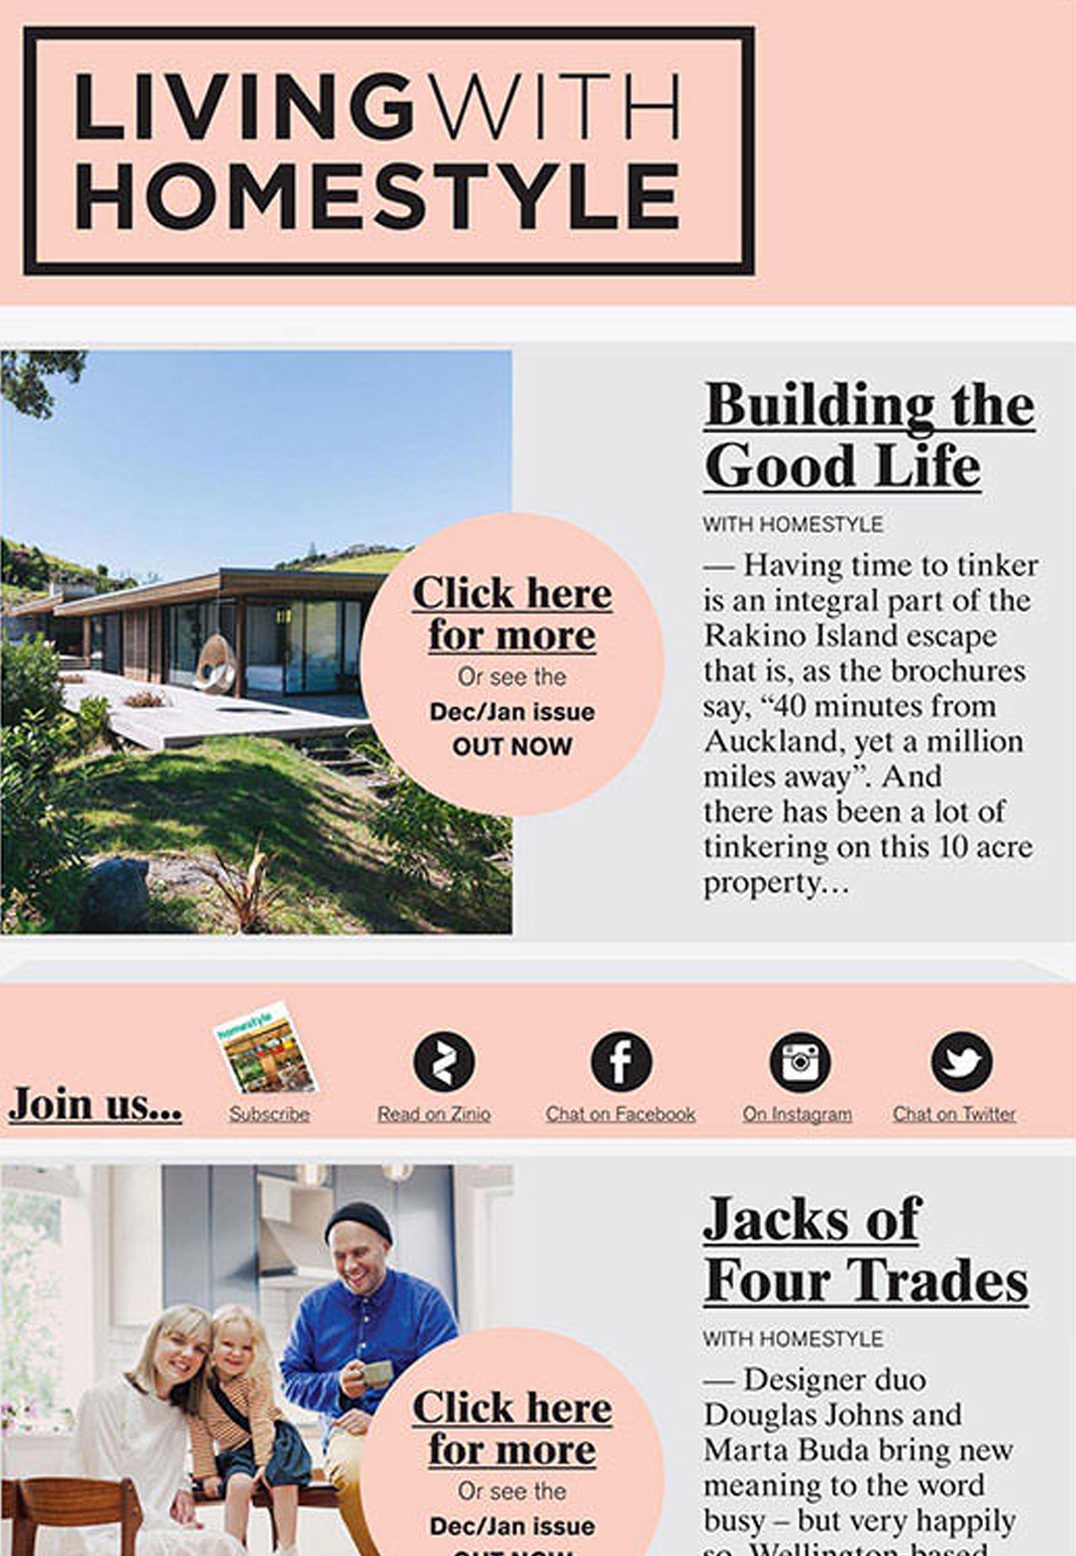 html email design example - Living With Homestyle